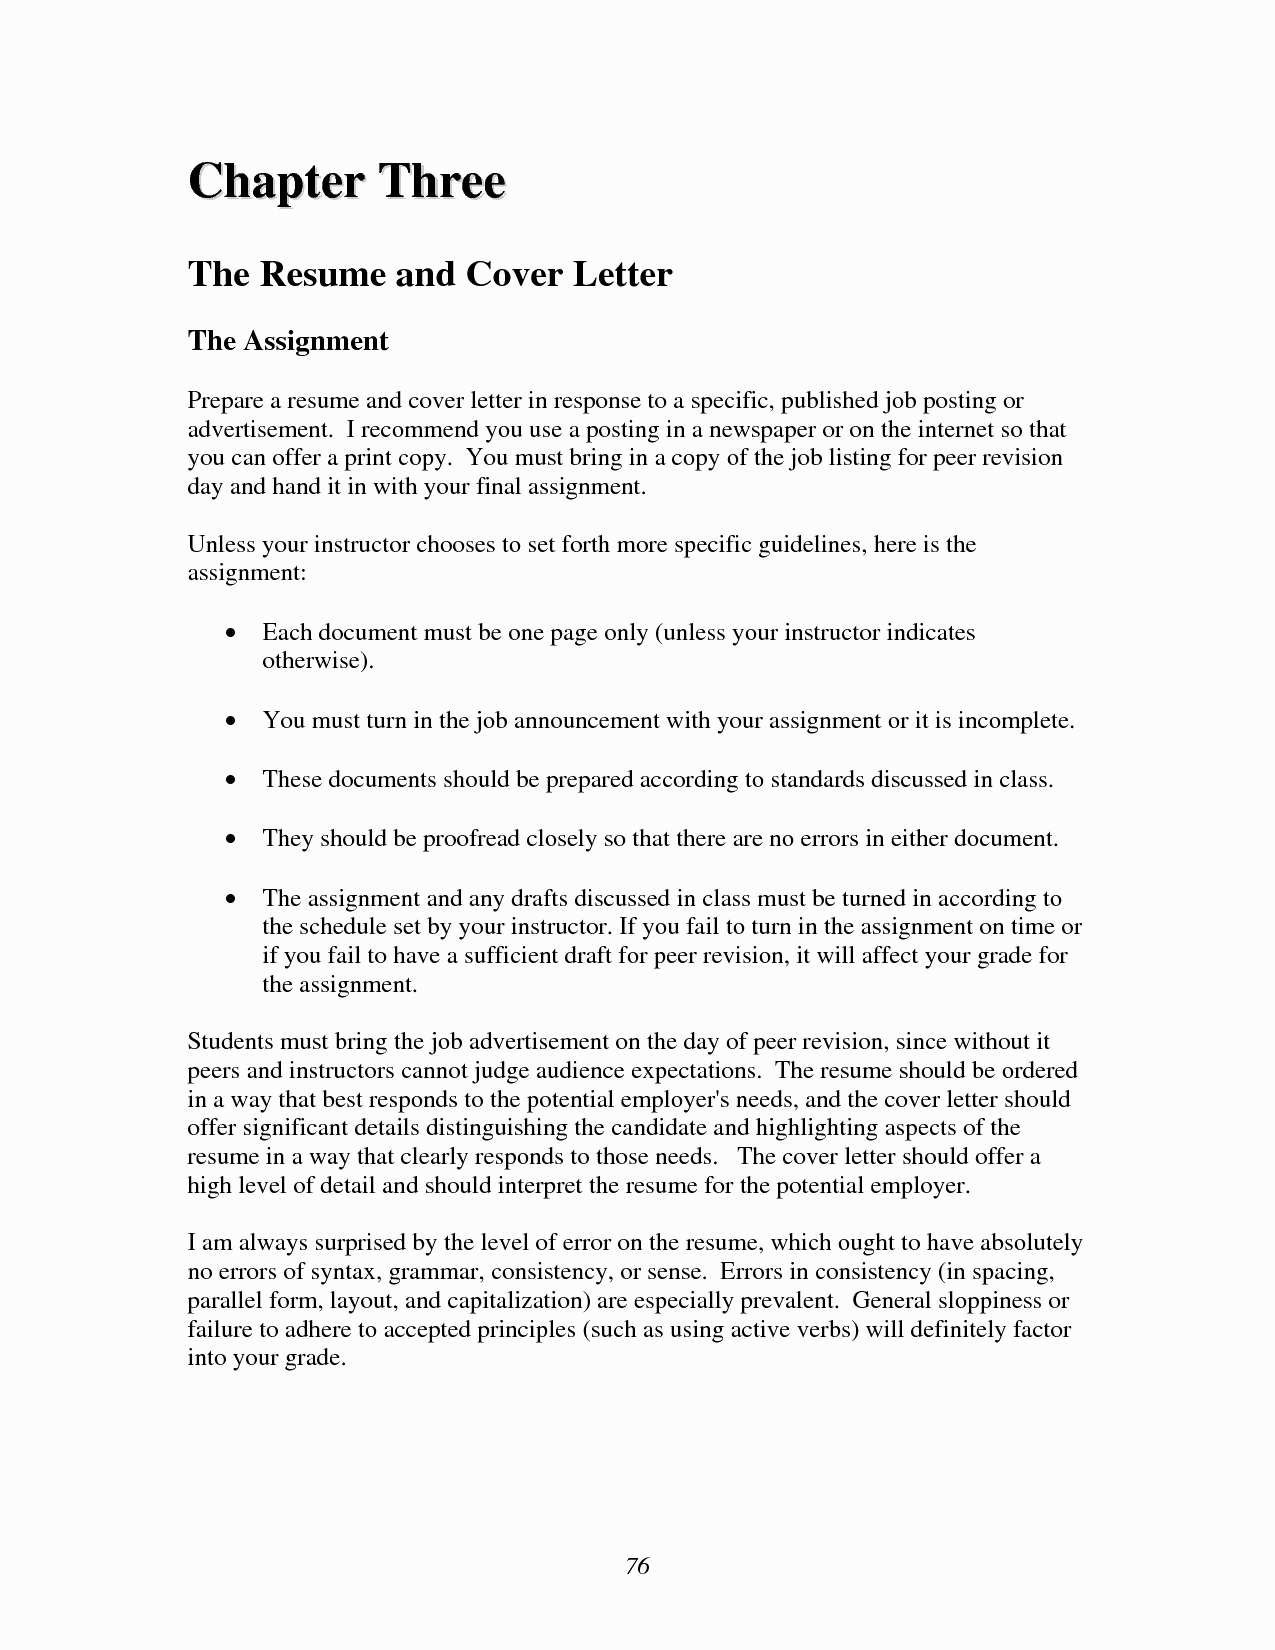 Cover Letter Template for Non Profit Jobs - Employment Letter Example Fresh Job Fer Letter Template Us Copy Od